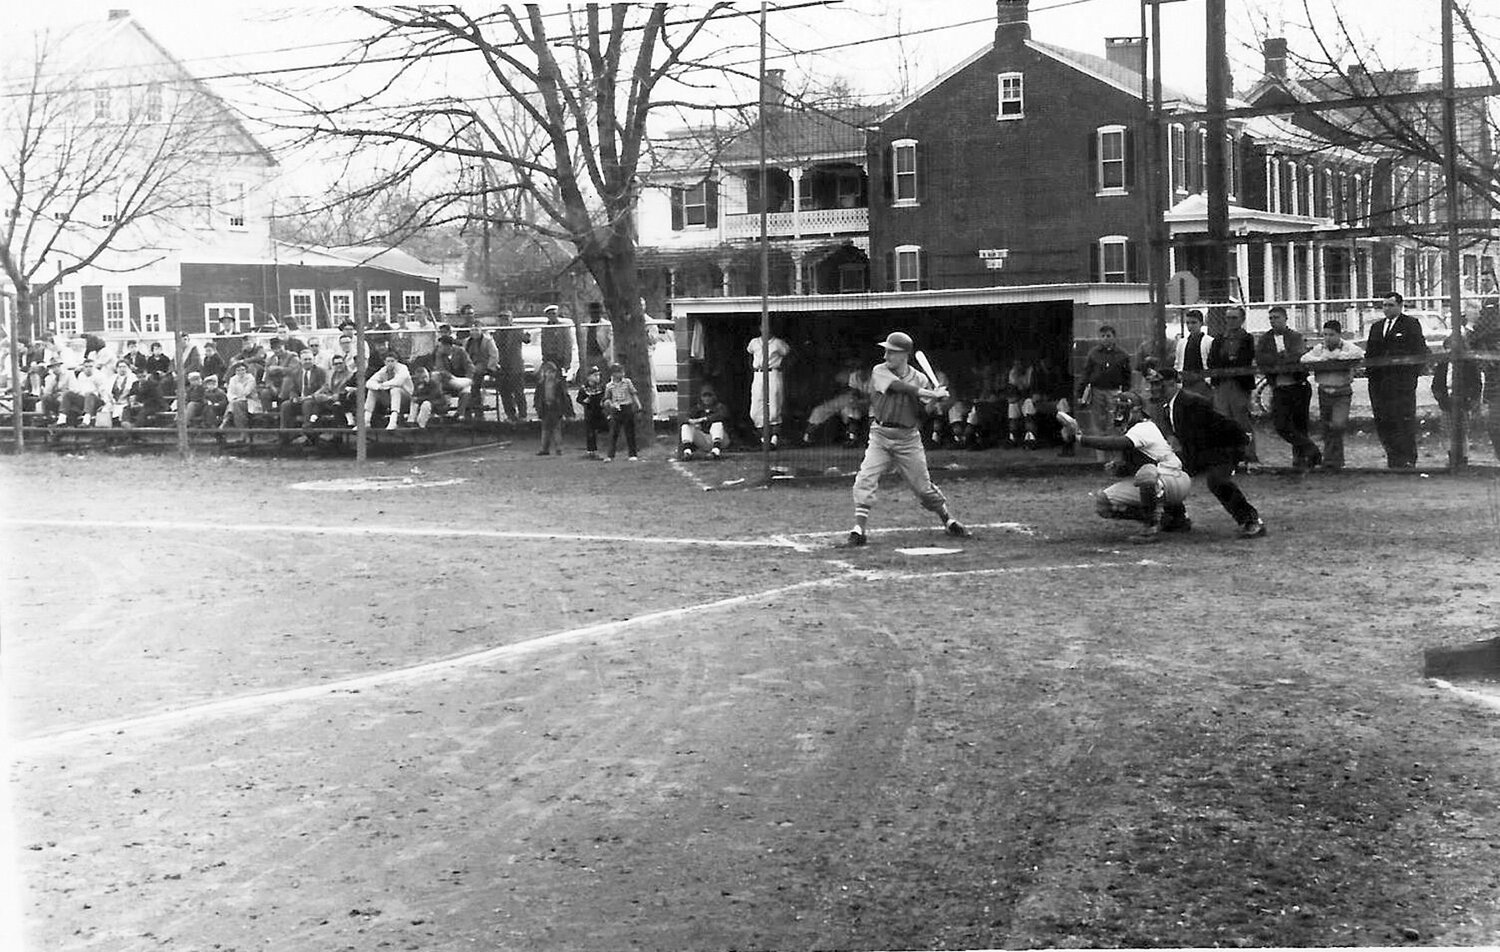 The past will come alive at Ely Field in Lambertville, N.J., with a historic recreation baseball game, played as it was in 1866.